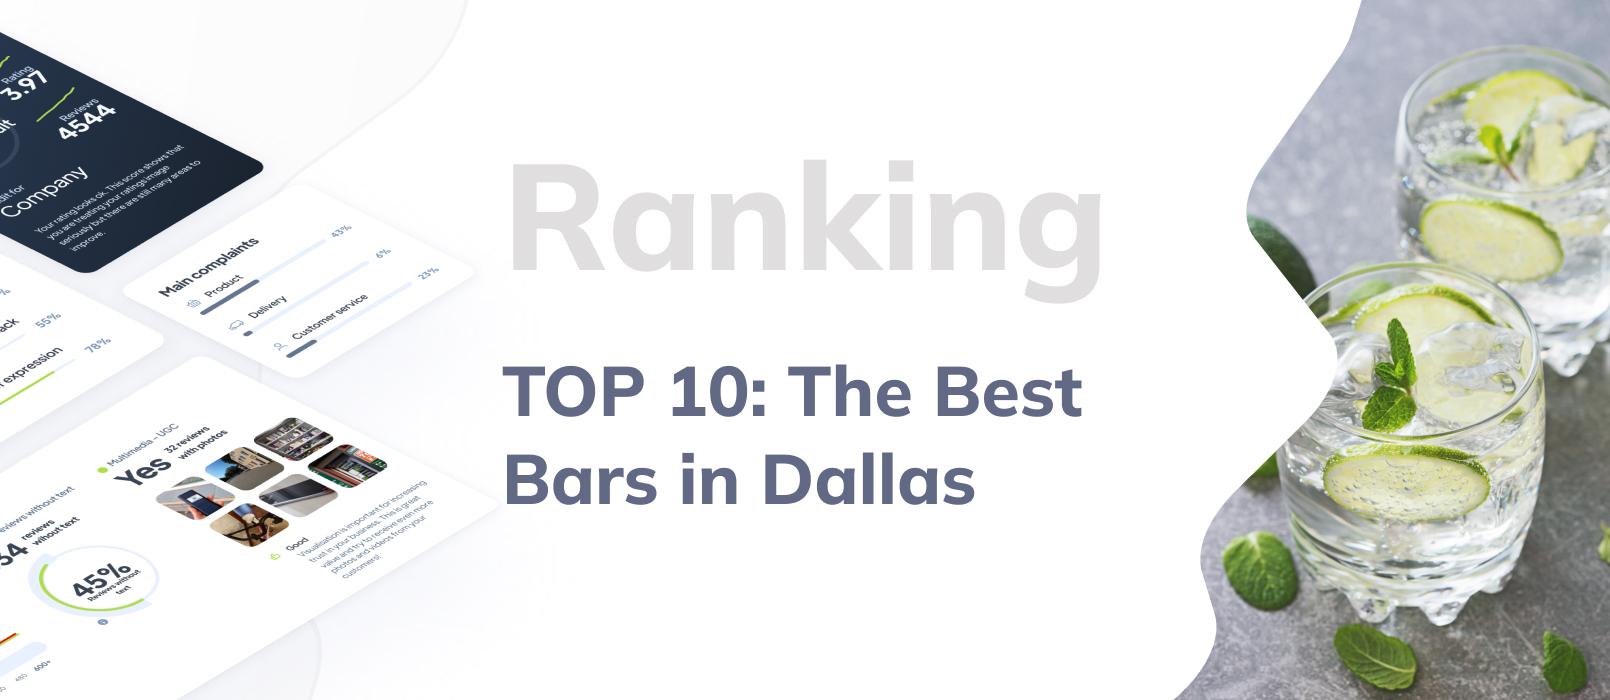 TOP 10: Ranking of the Best Bars in Dallas